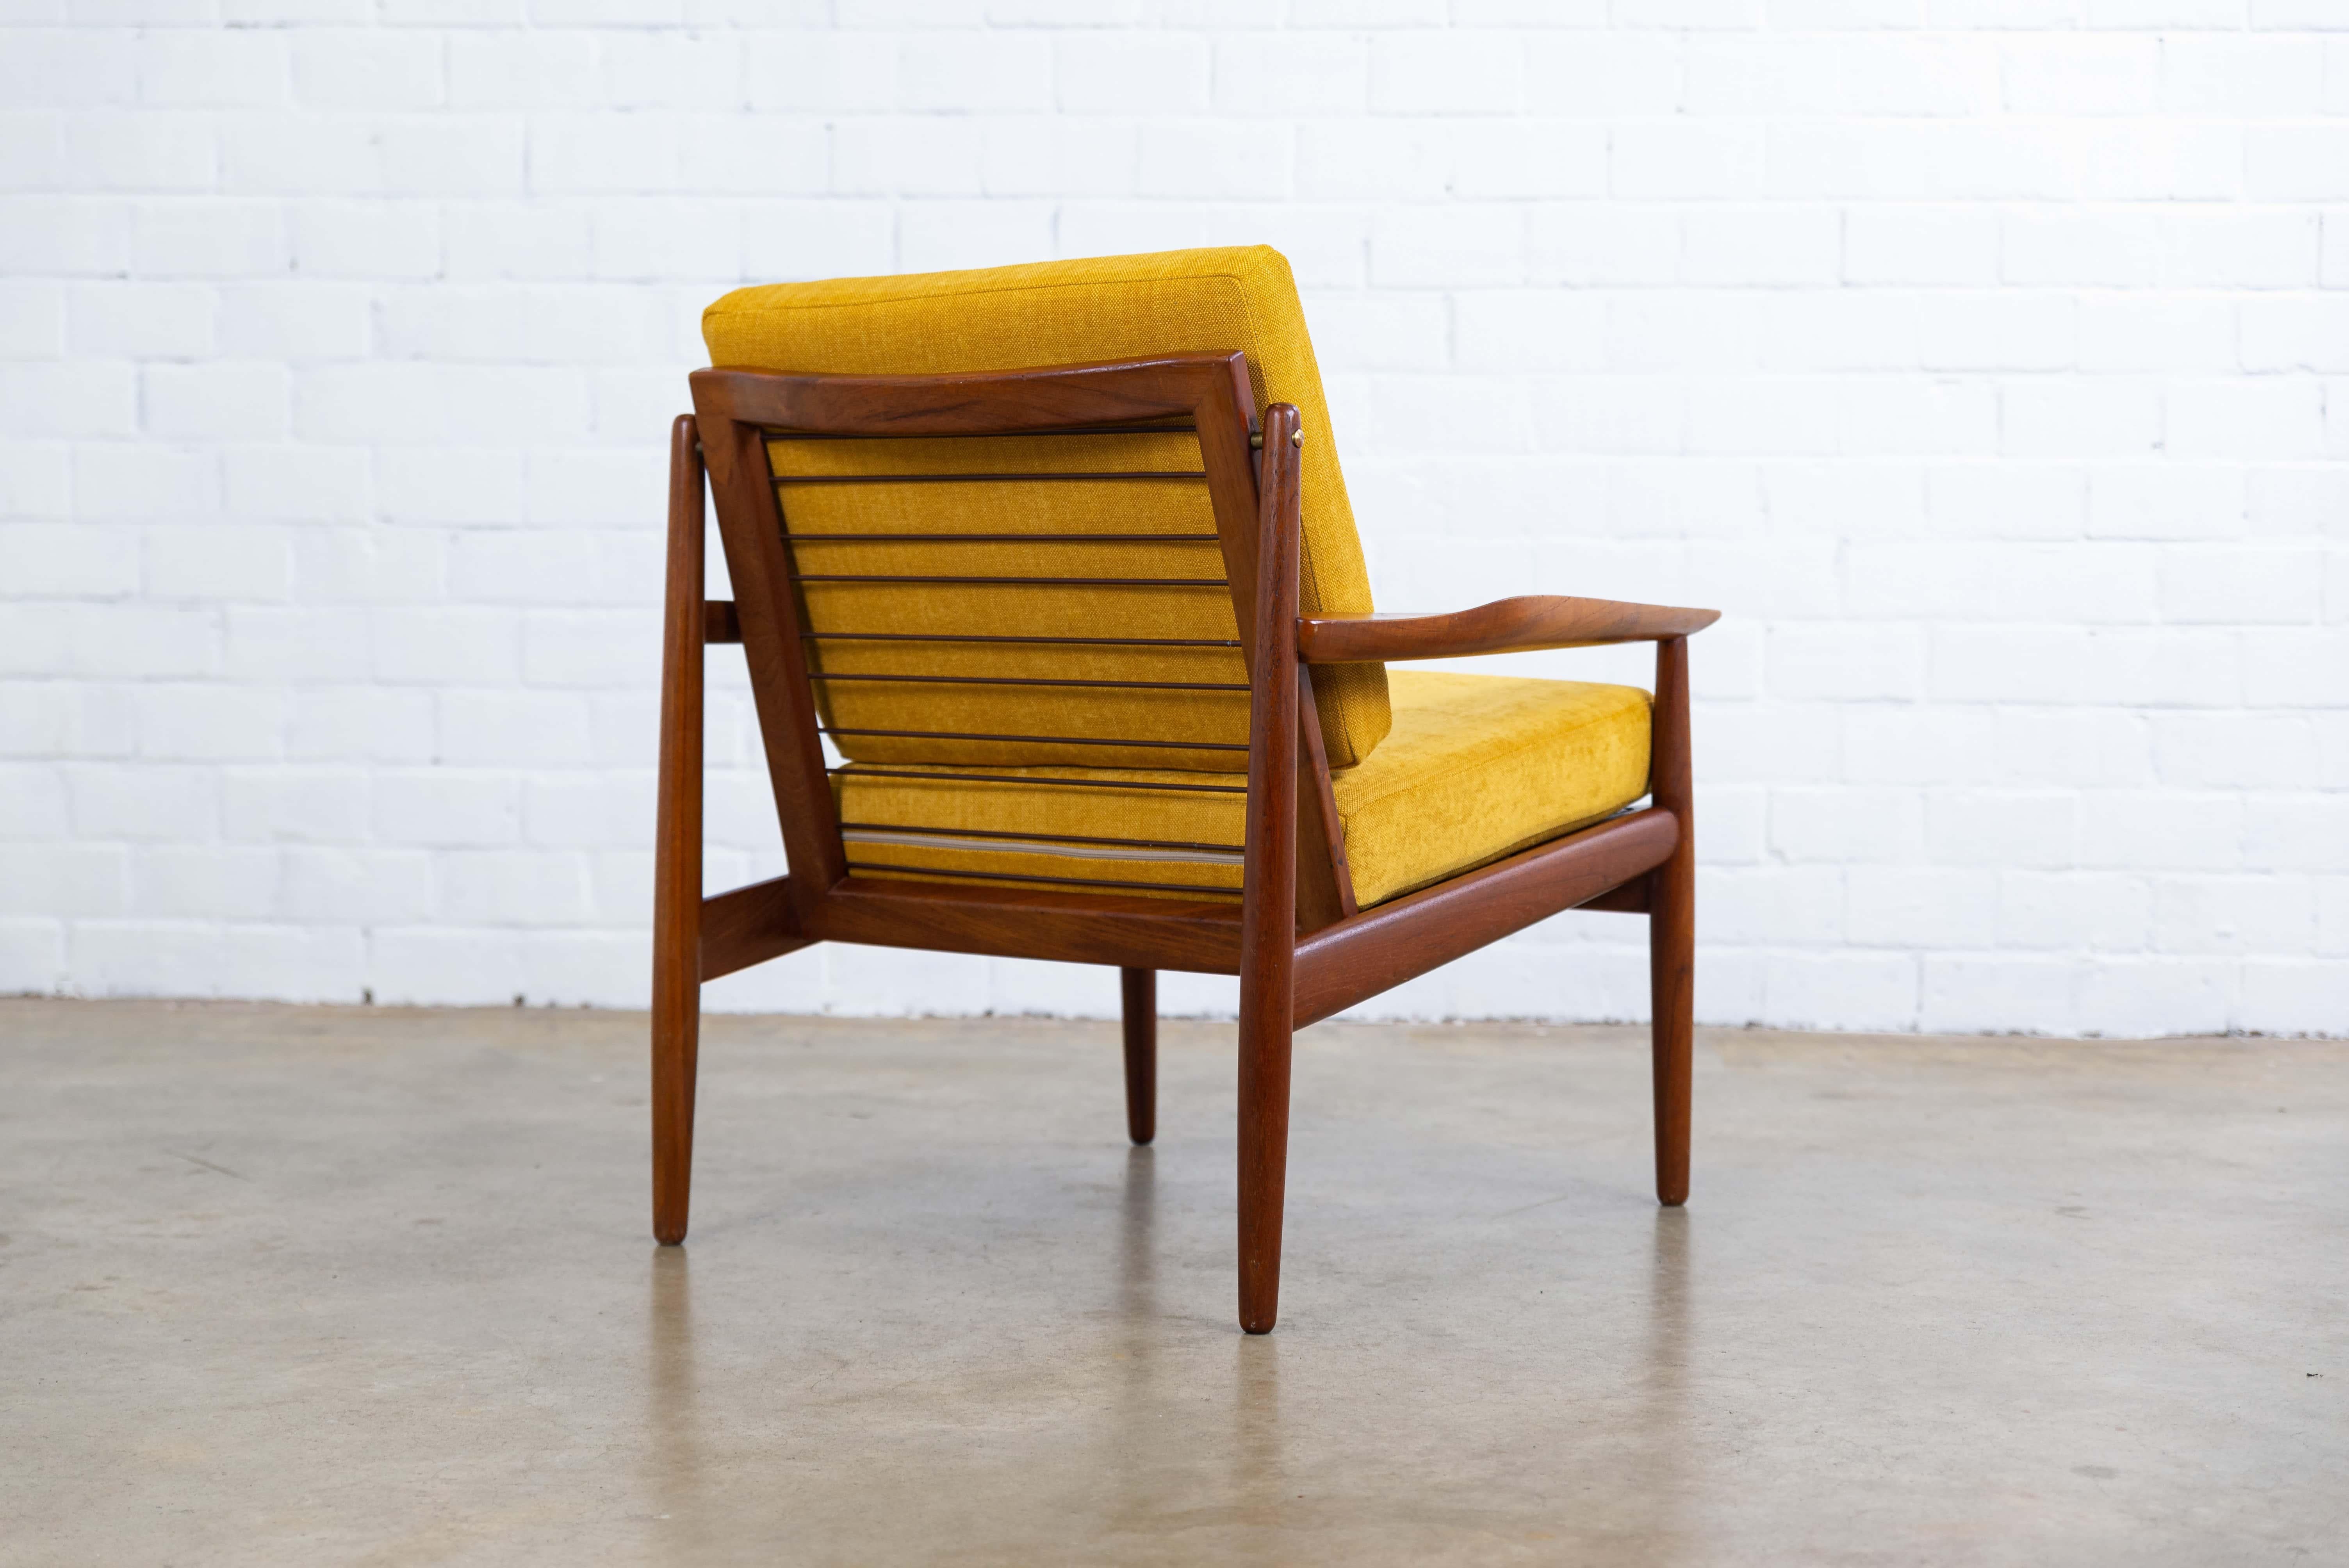 Scandinavian Modern Midcentury Danish Easy Chair by Arne Vodder for Glostrup in Teak and Yellow For Sale